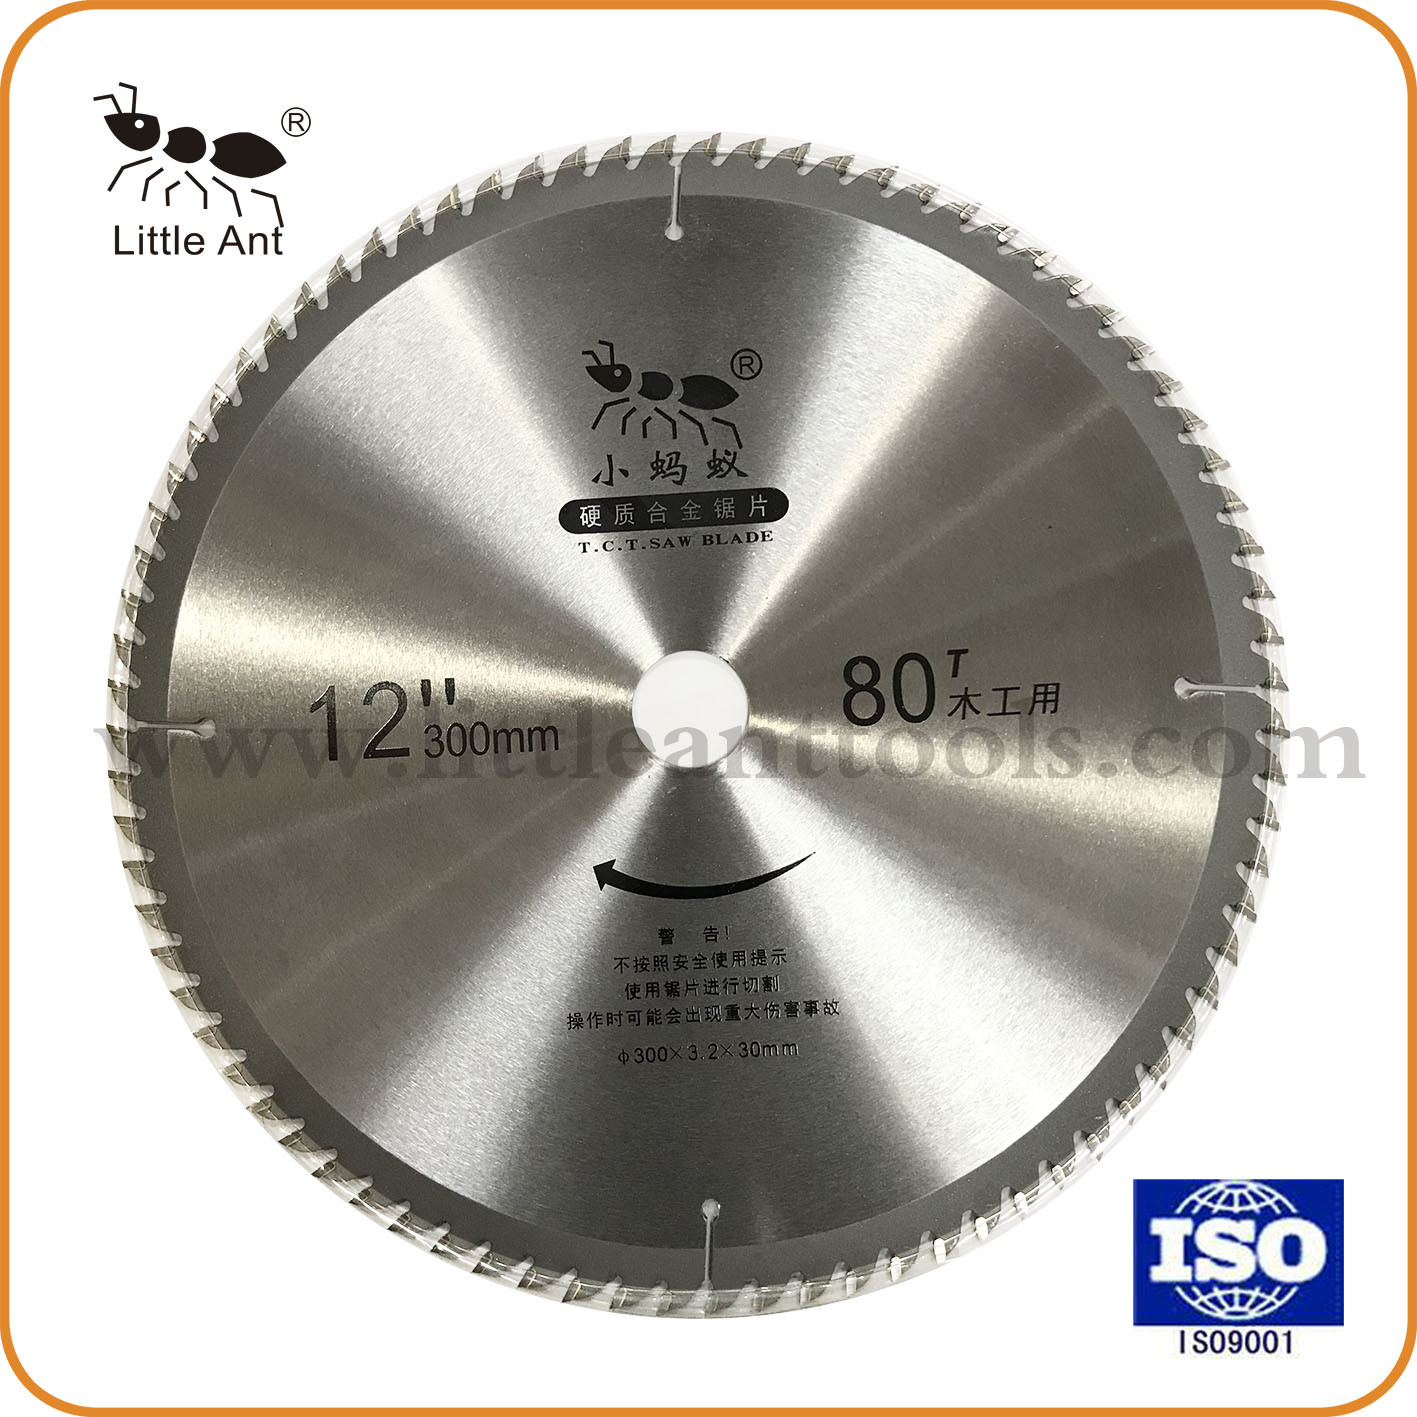 12 Inch Tct Saw Blade for Wood Cutting